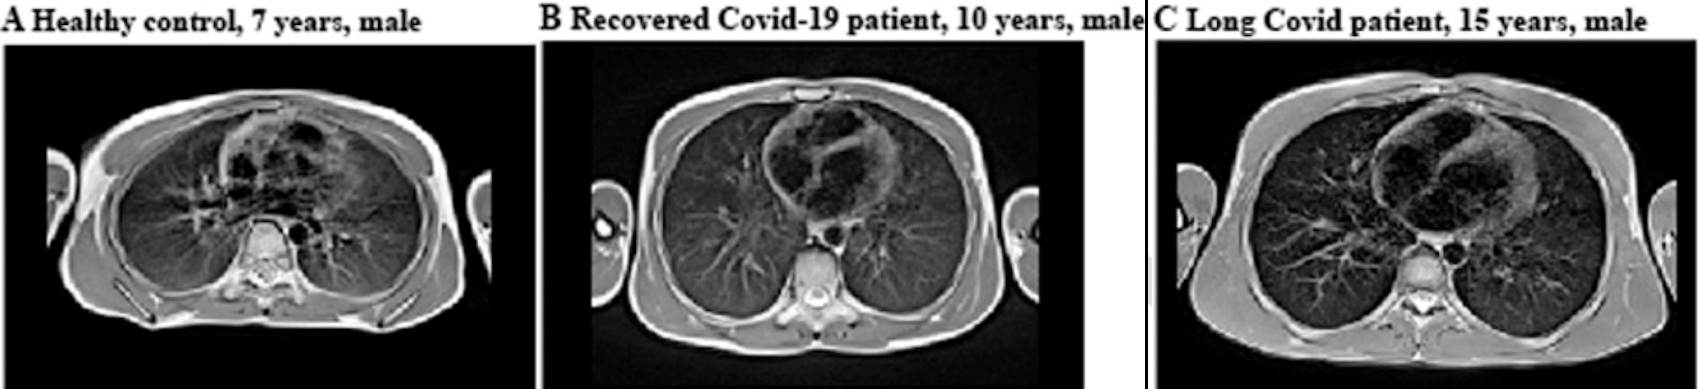 Images acquired in a healthy control as well as a participant recovered from COVID and a participant with long COVID